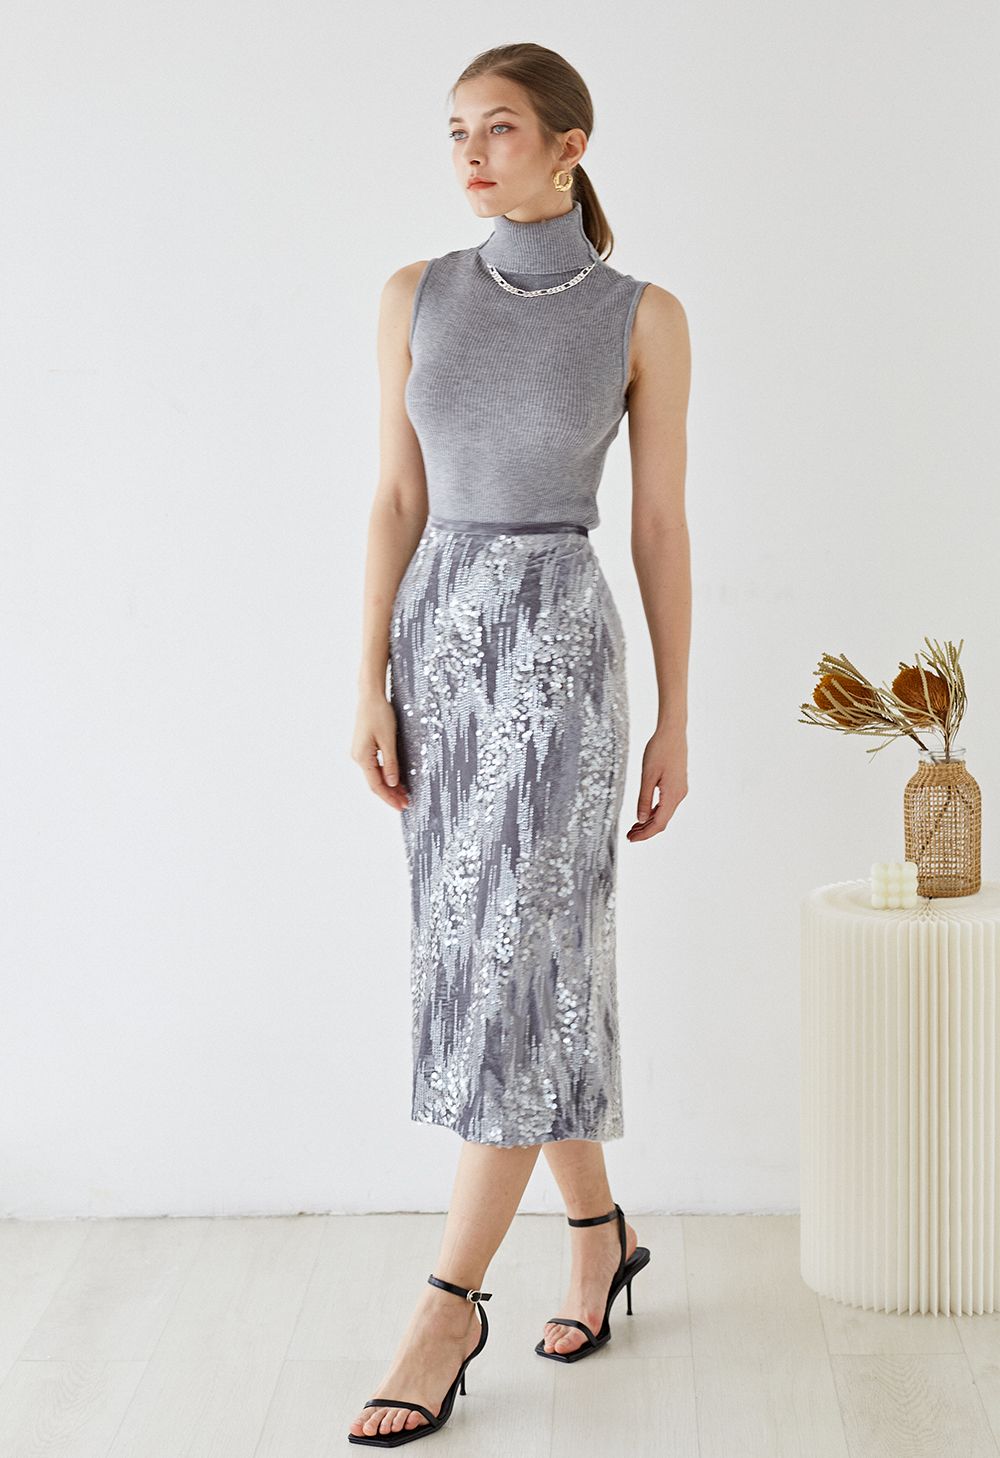 Turtleneck Soft Knit Sleeveless Top in Grey